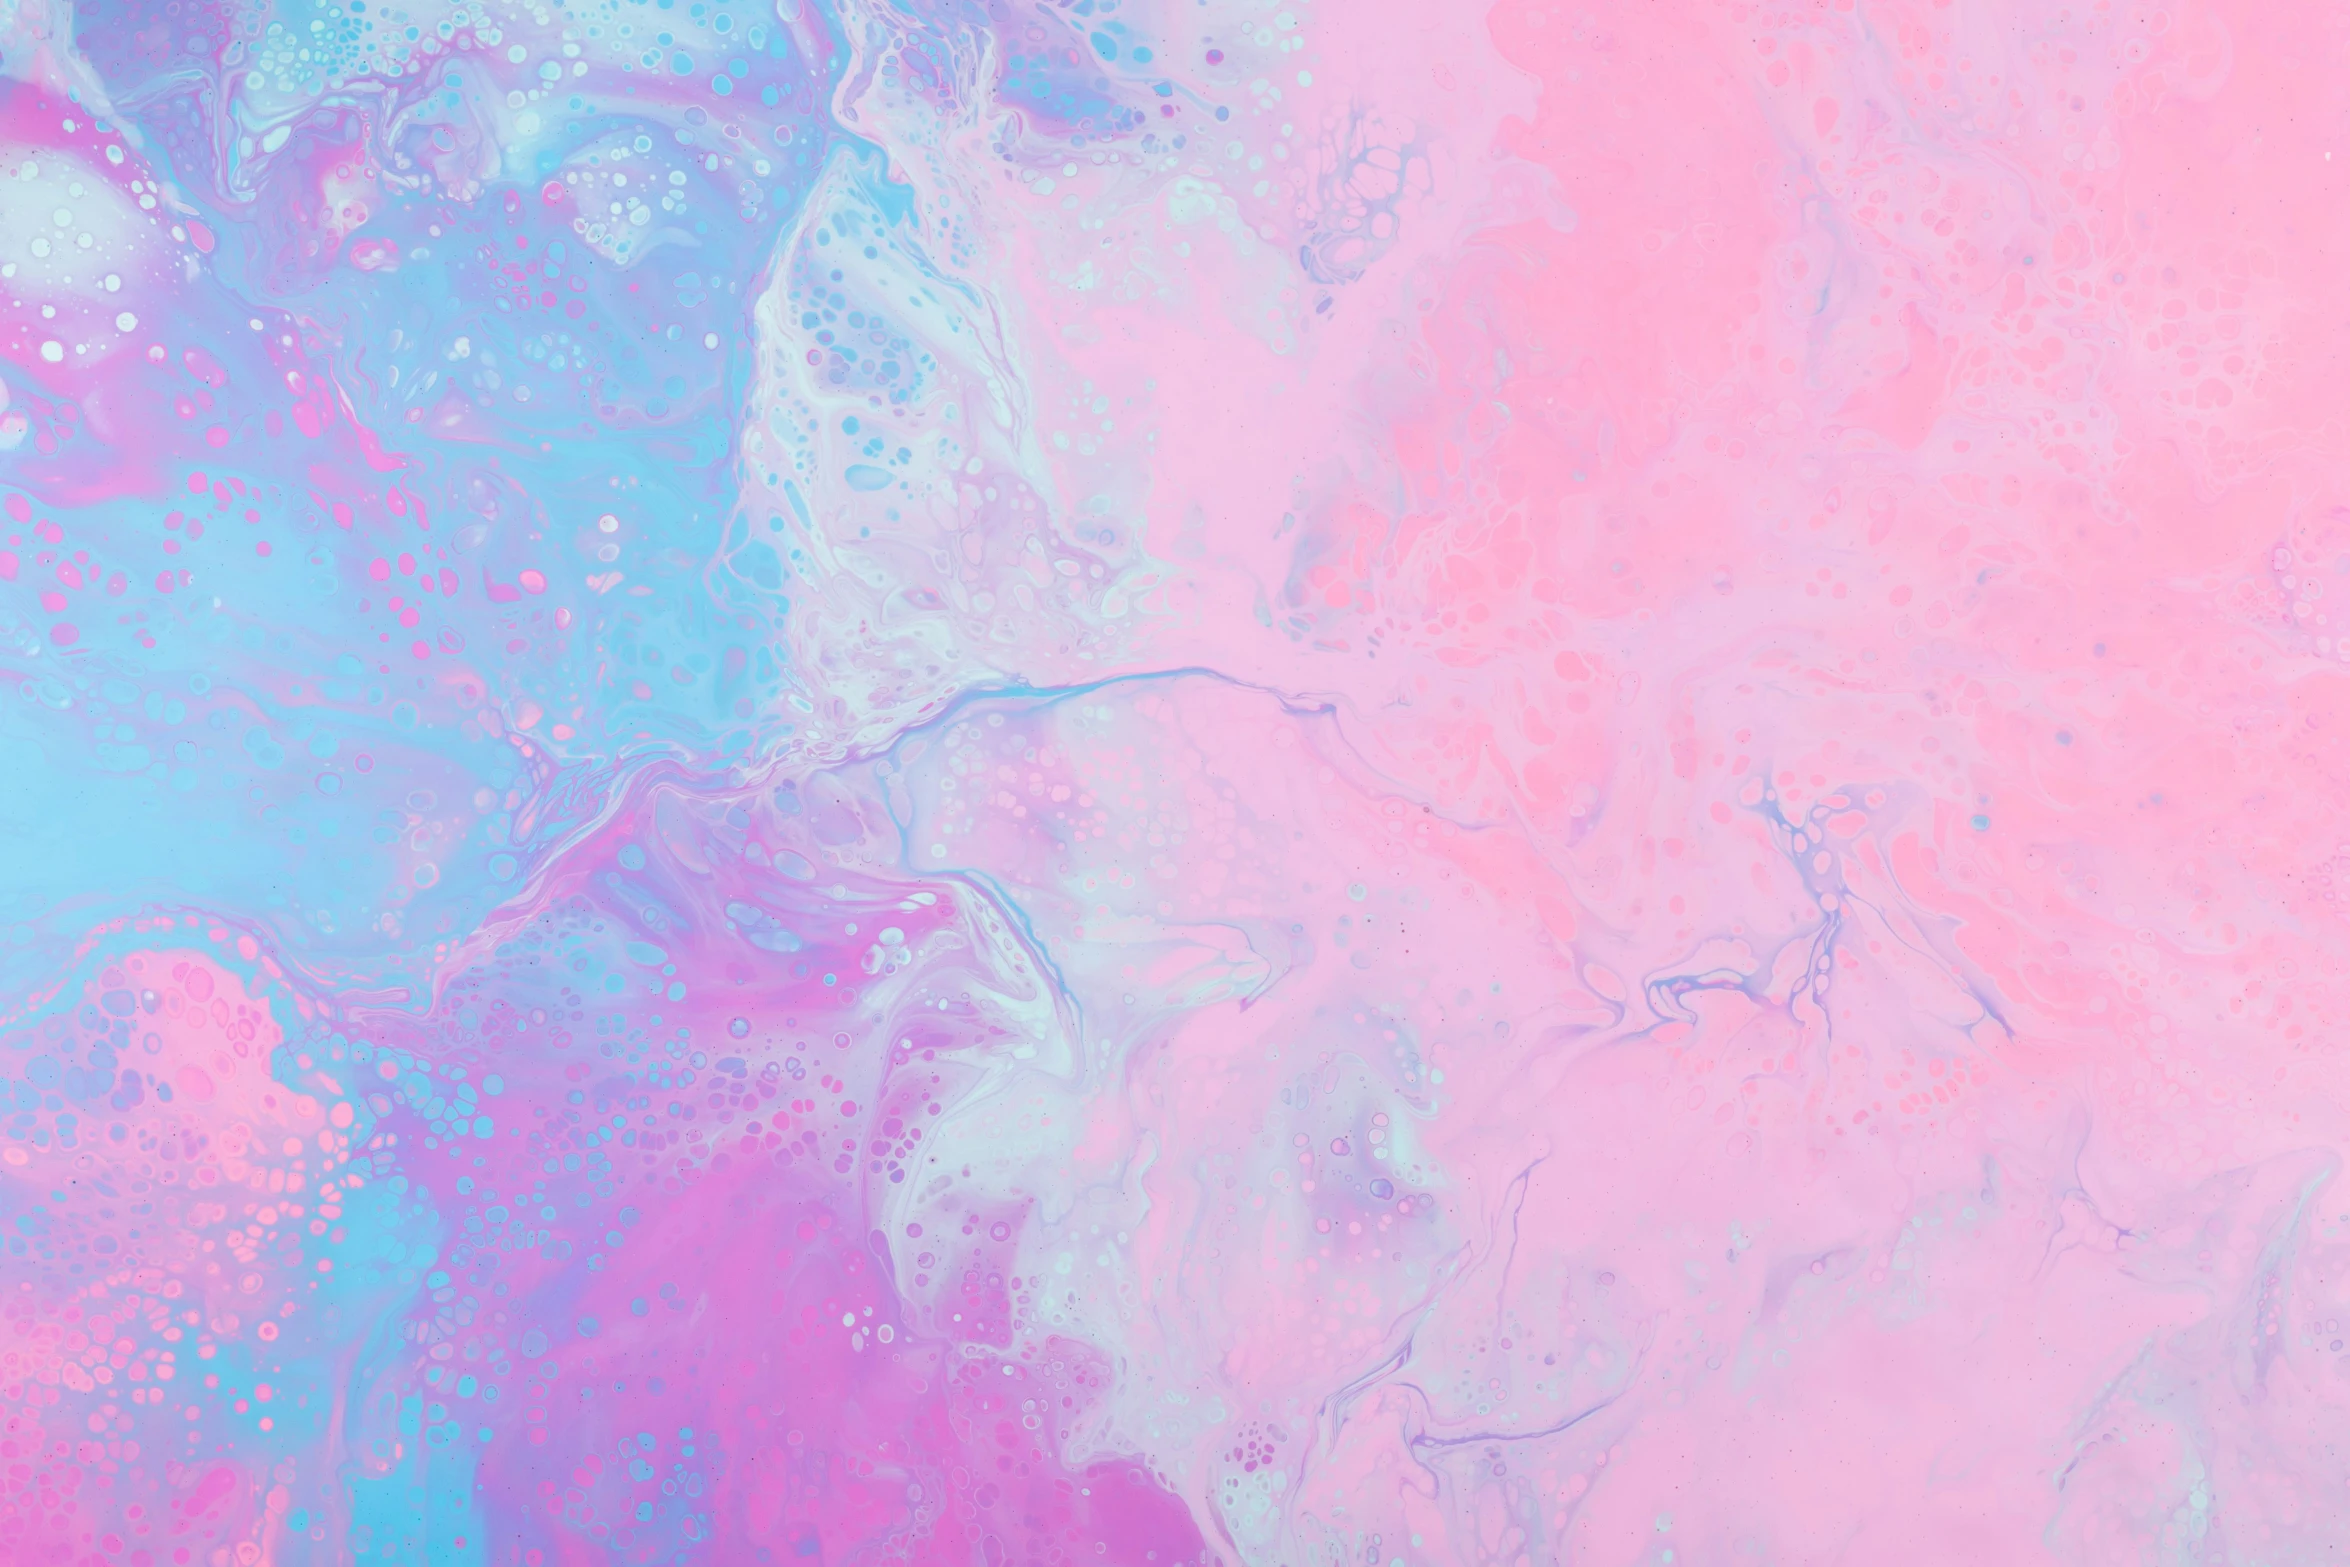 abstract design made from fluid paint with pastel and blue